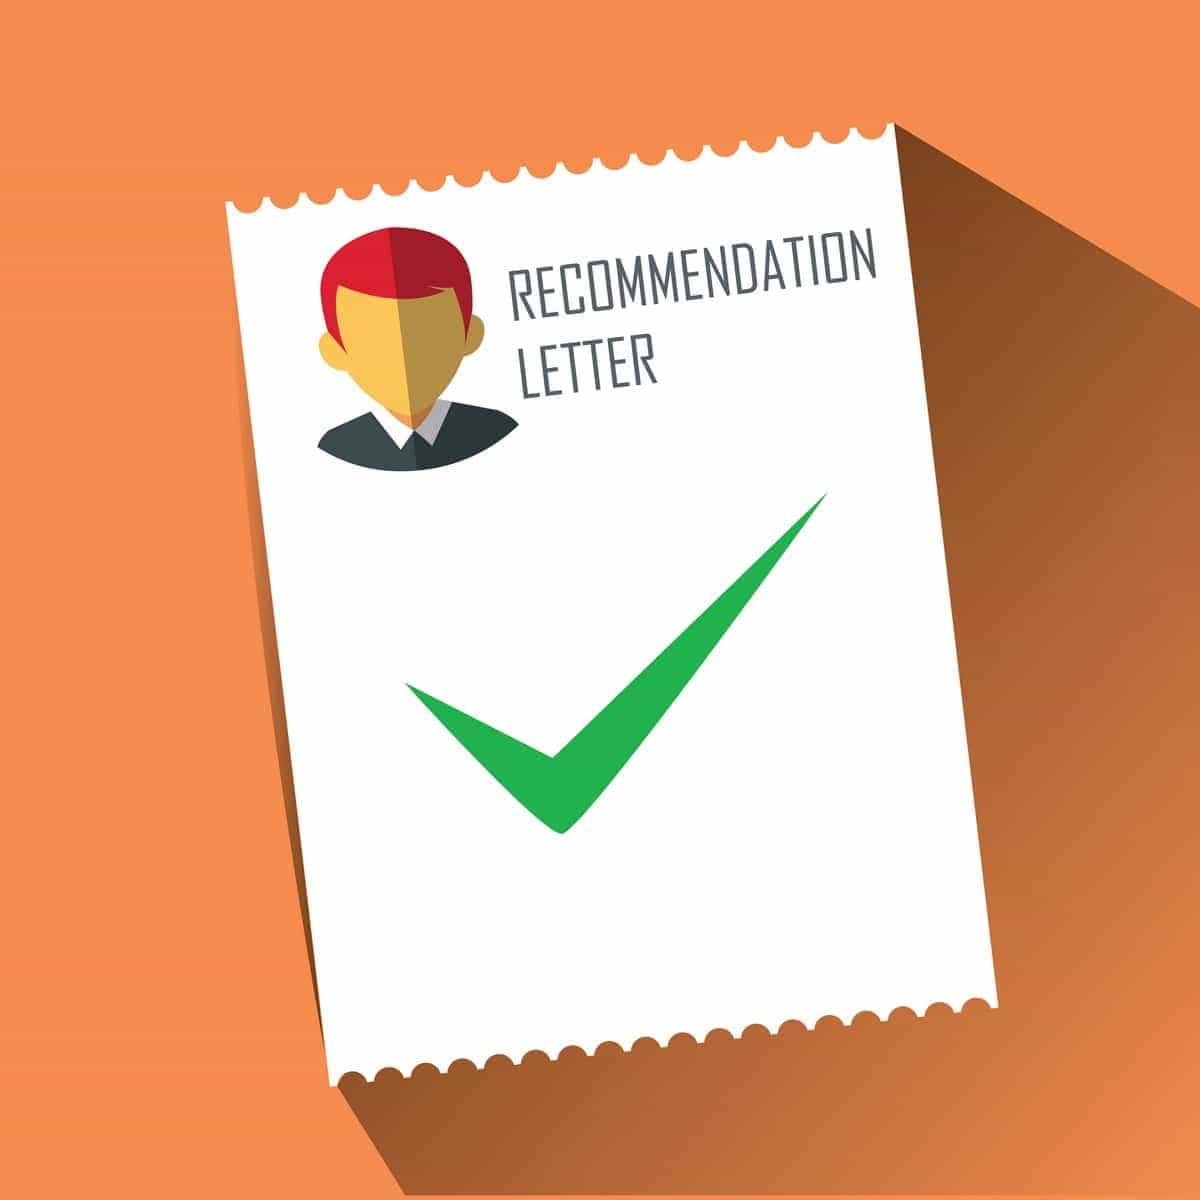 How To Ask For A Recommendation Letter from Someone?